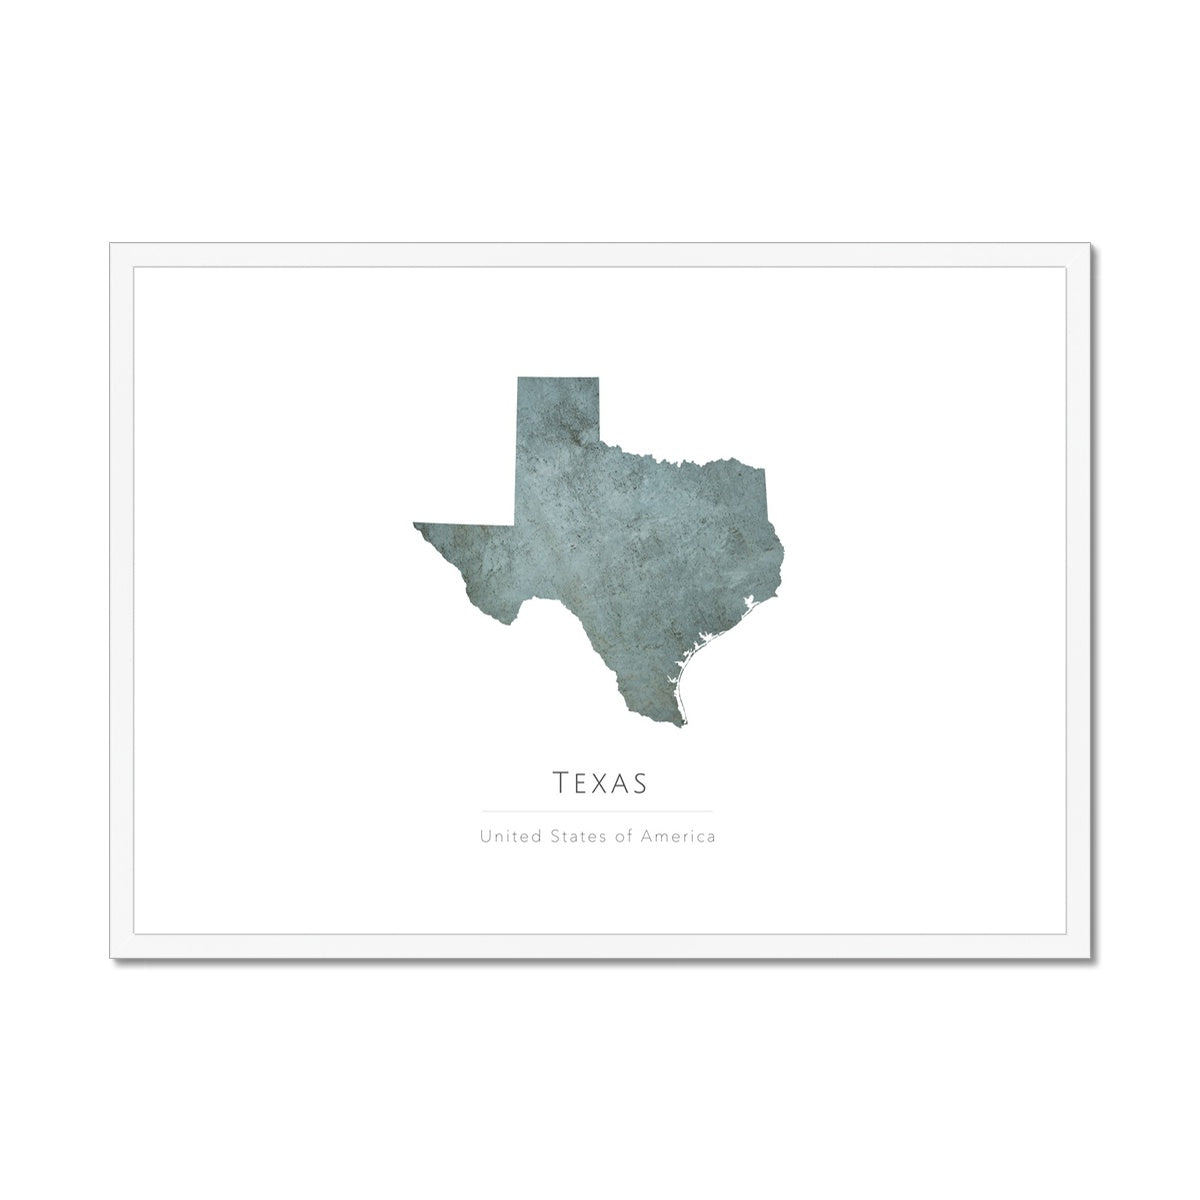 Texas -  Framed & Mounted Map